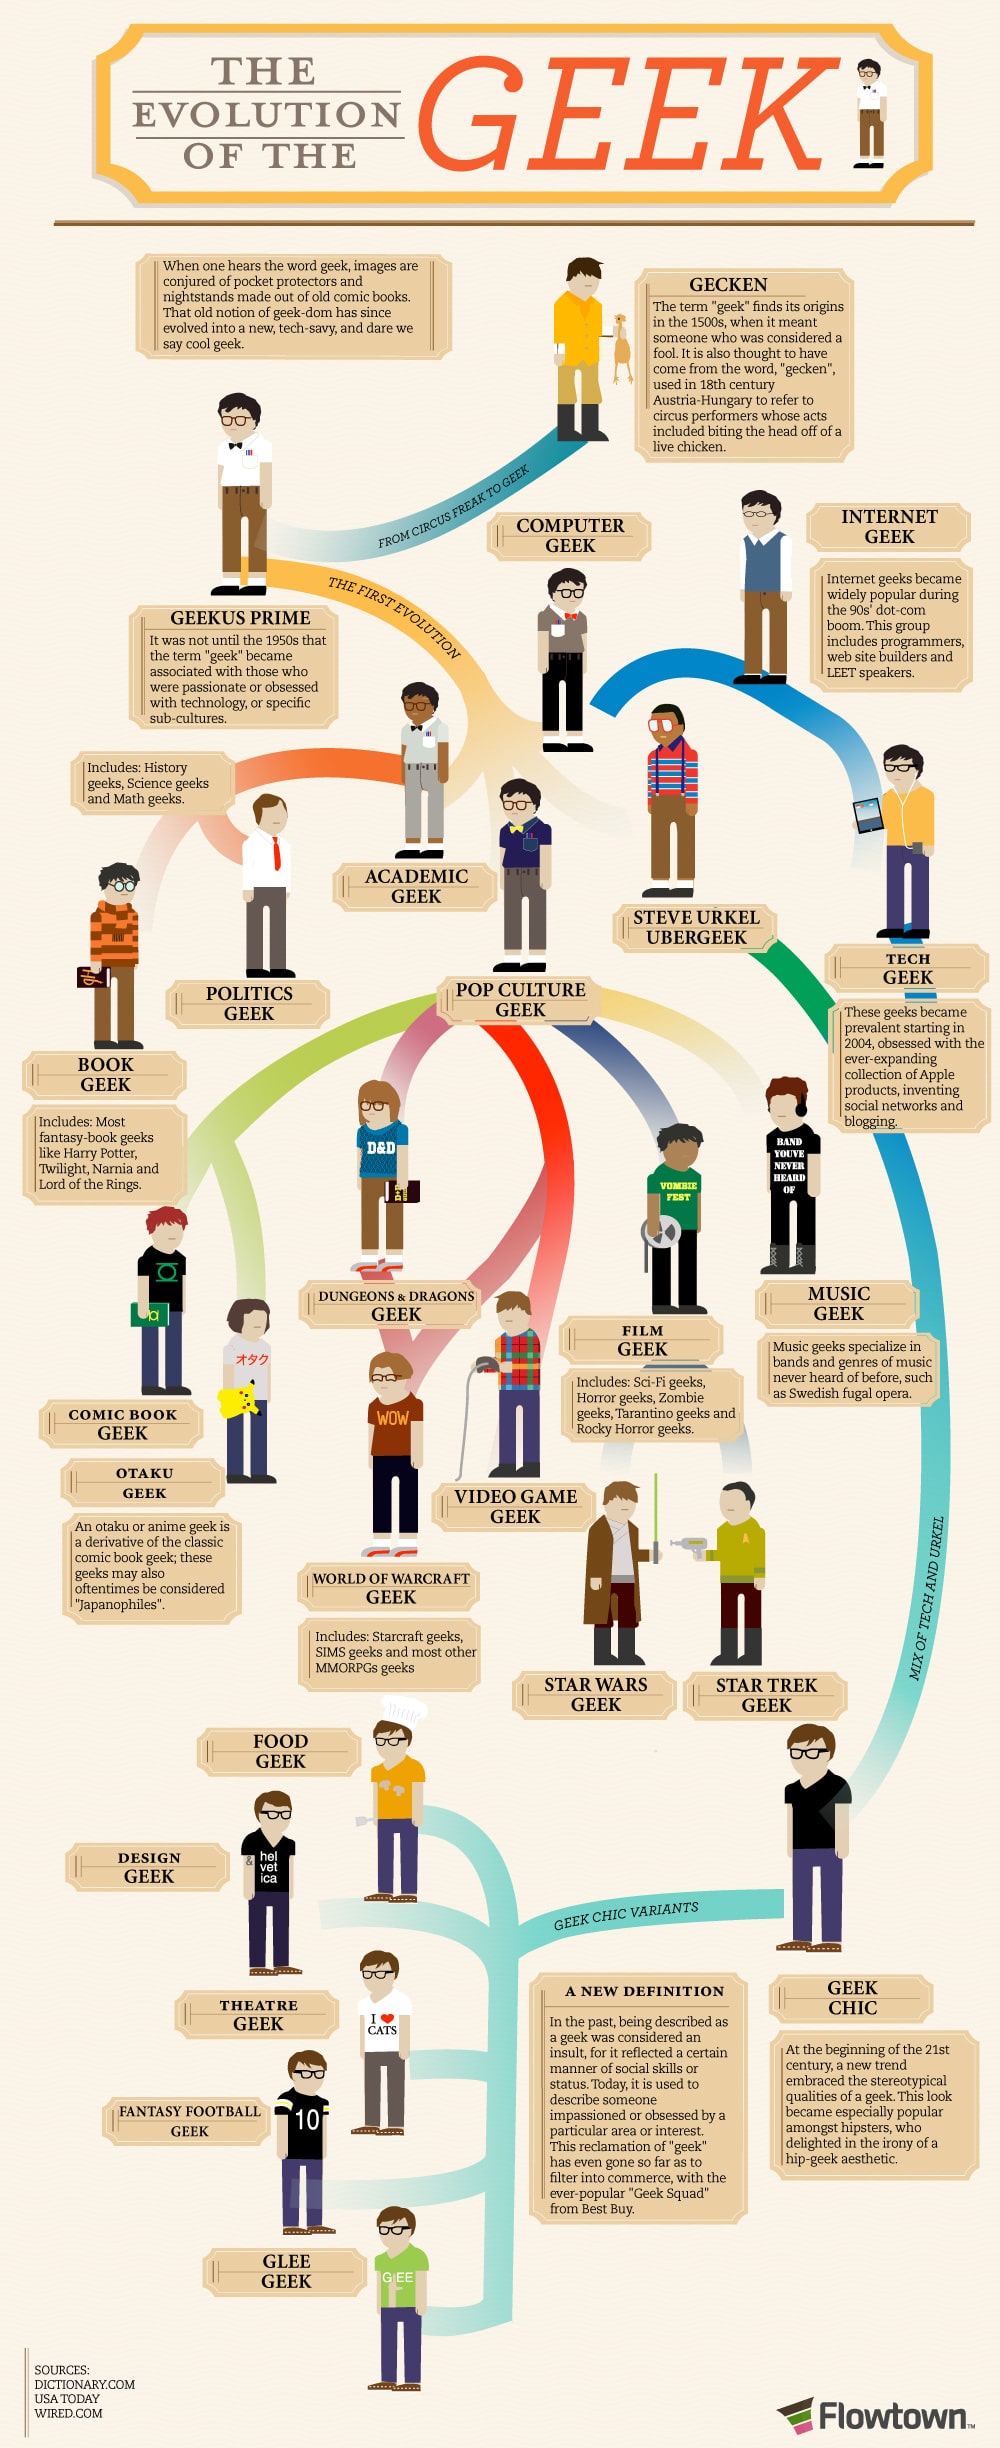 The Evolution Of The Geek [Infographic]